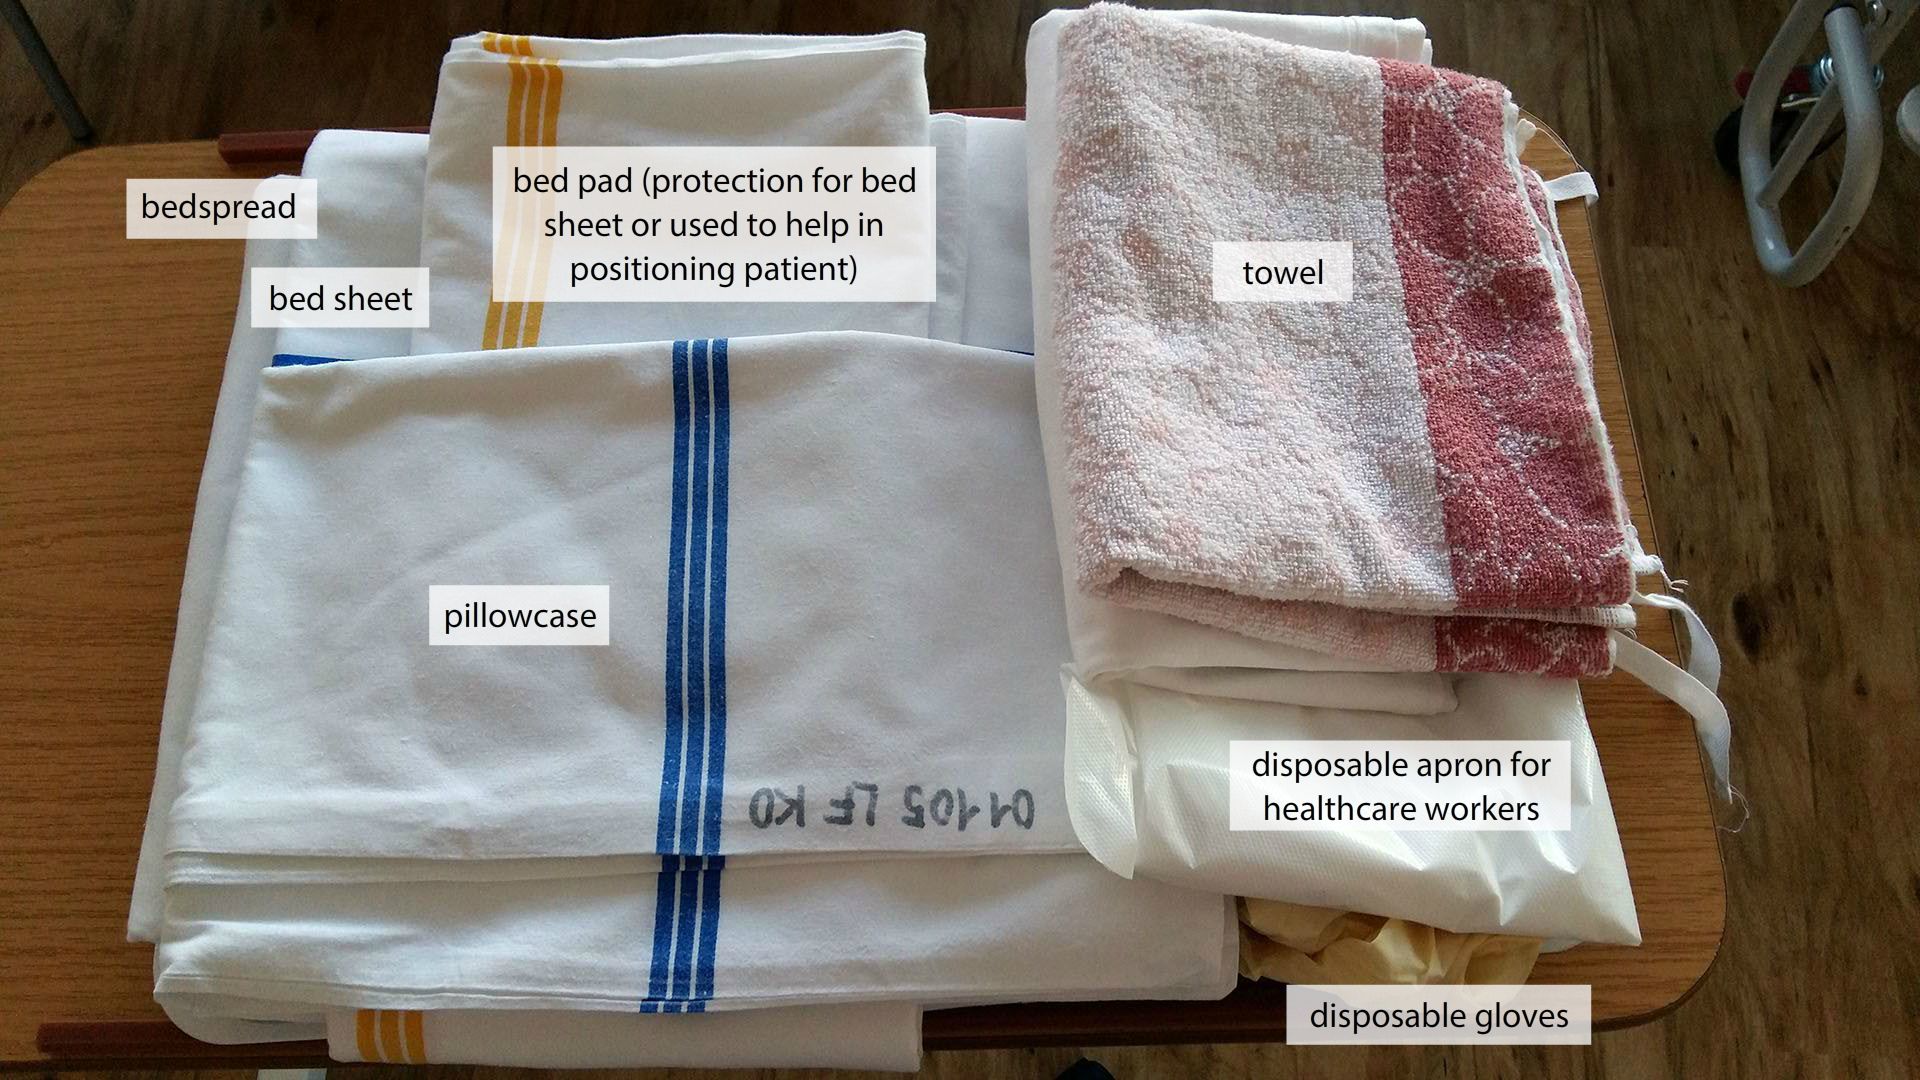 Arrangement of clean bed linen on the tray